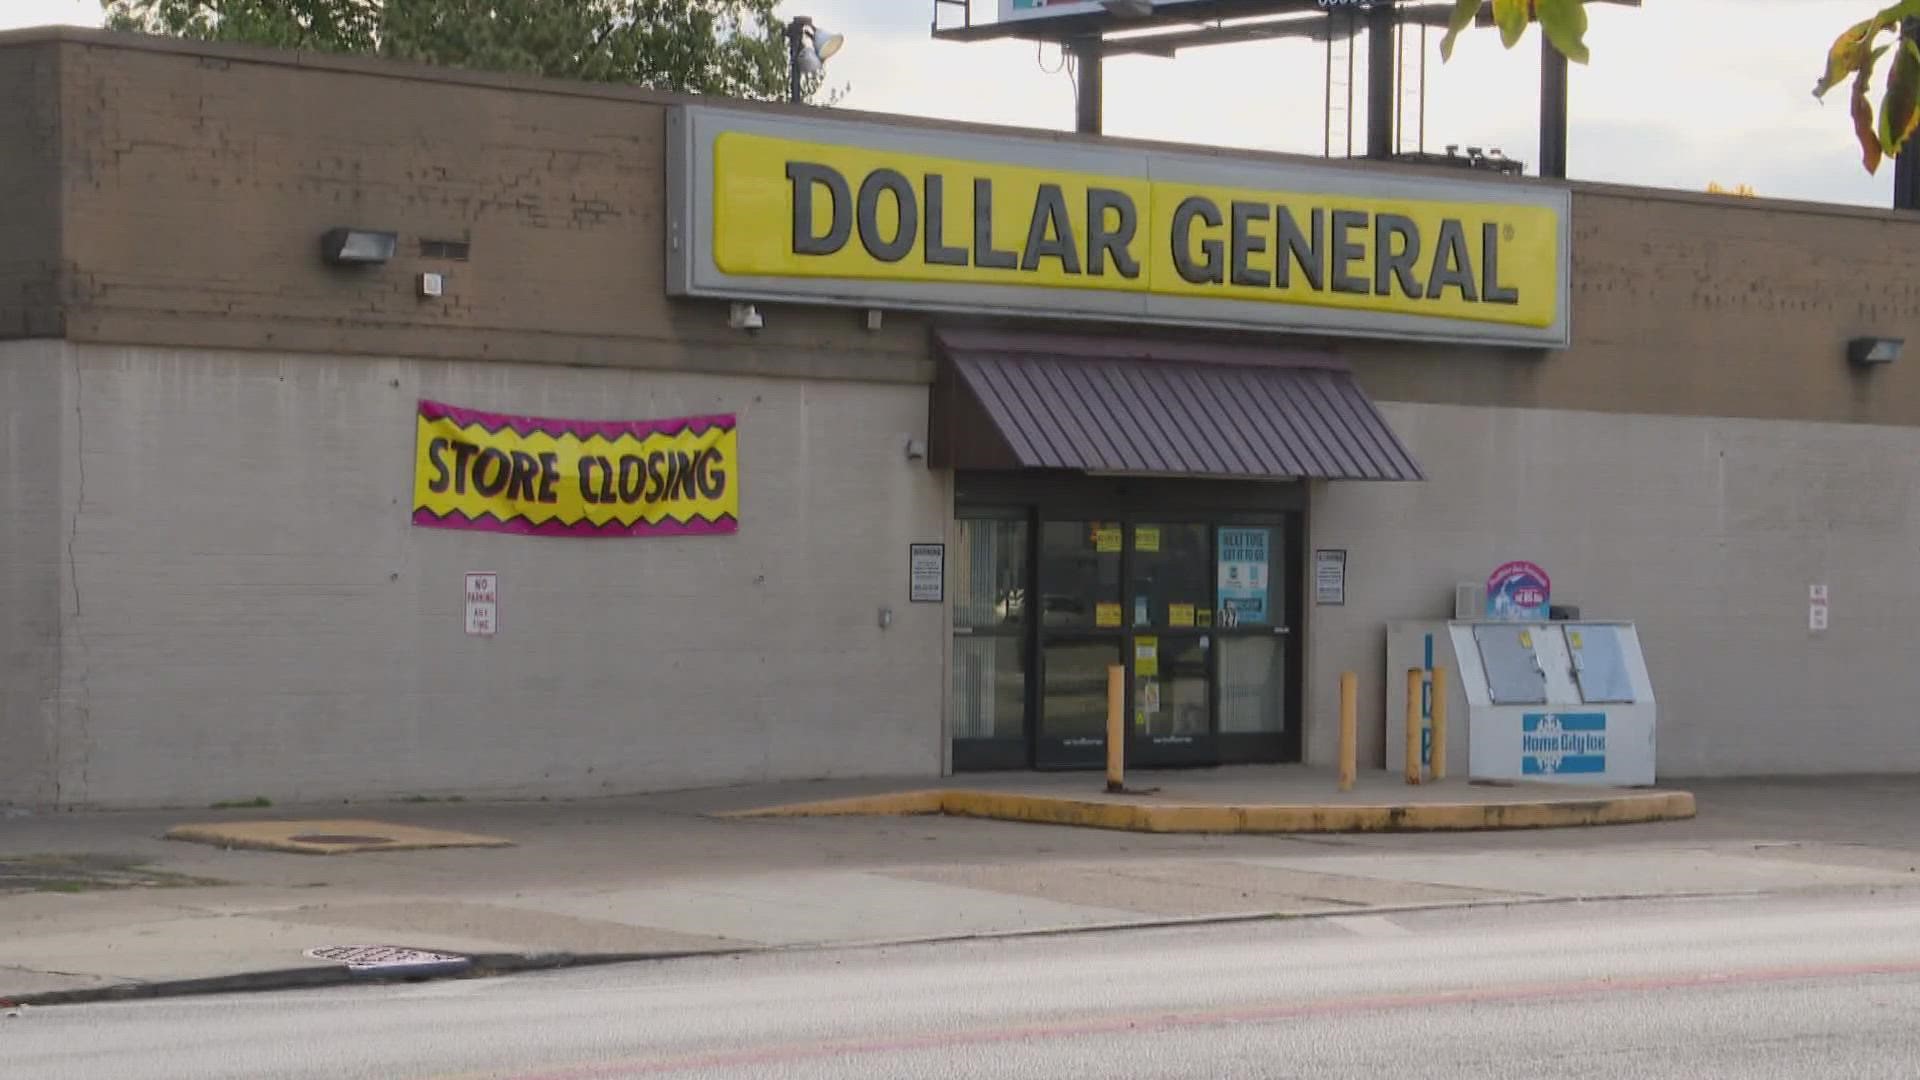 Dollar General closure further limits north side grocery options